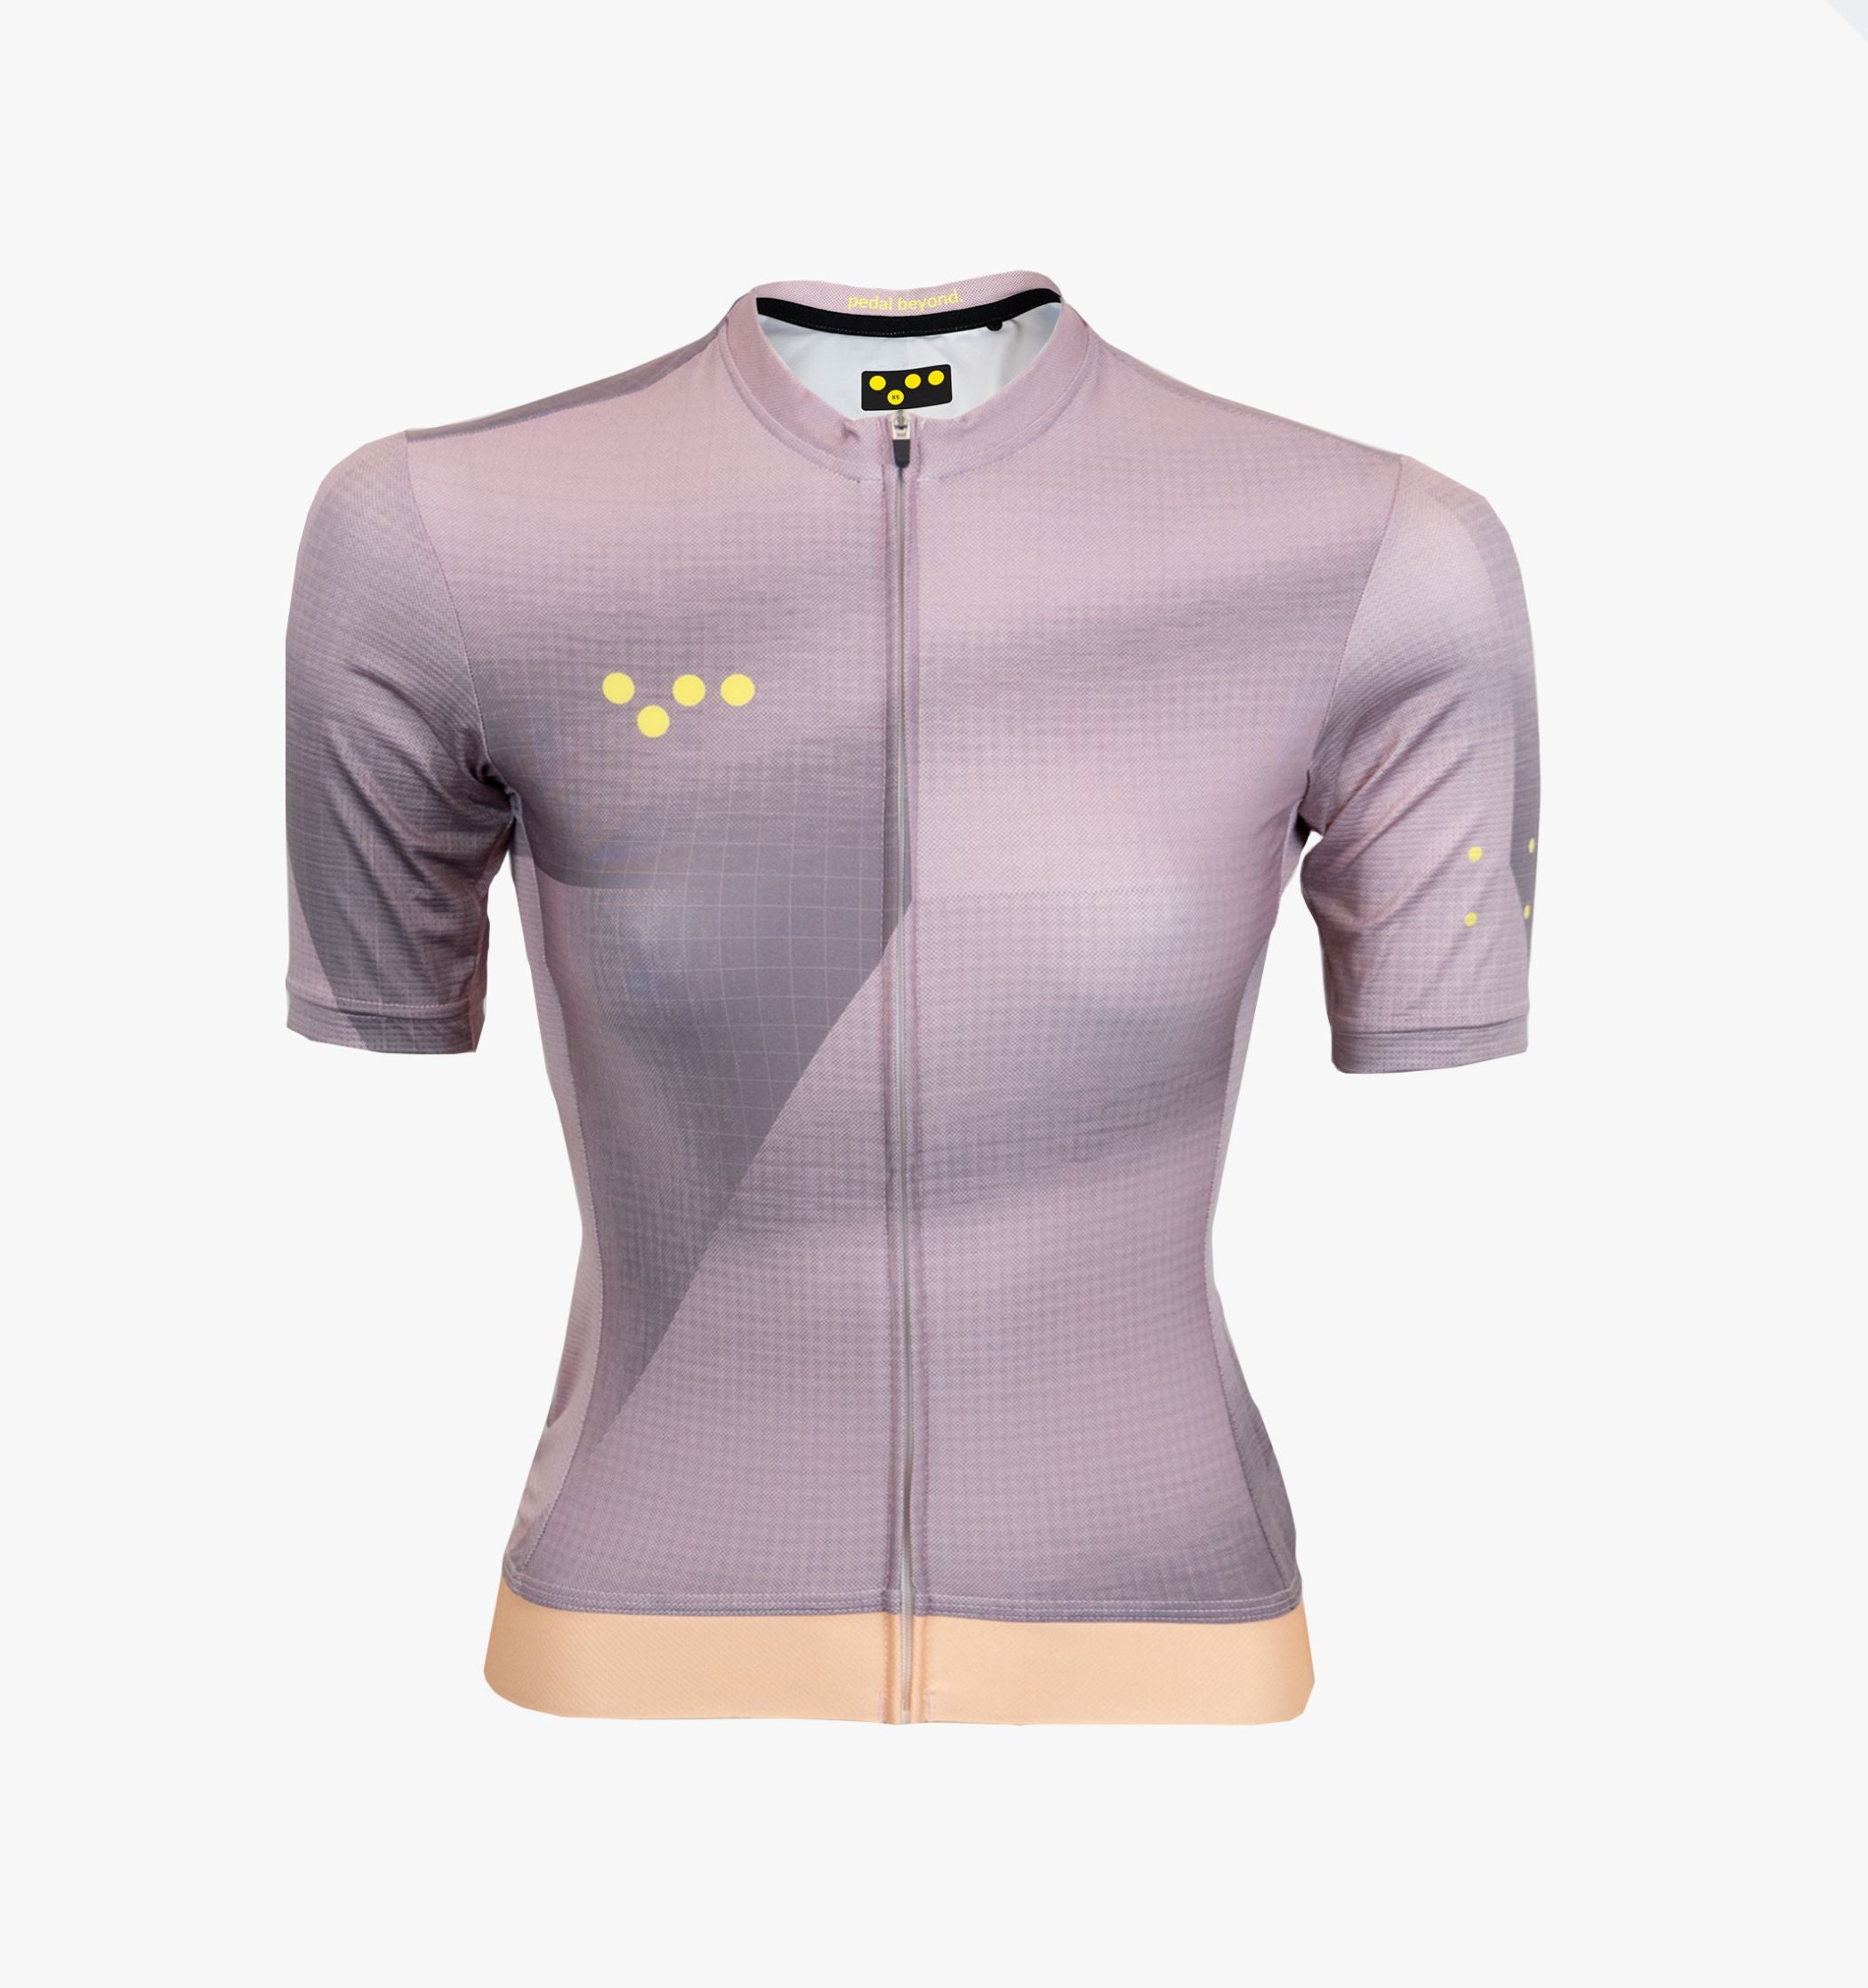 Kinetic Classic Jersey